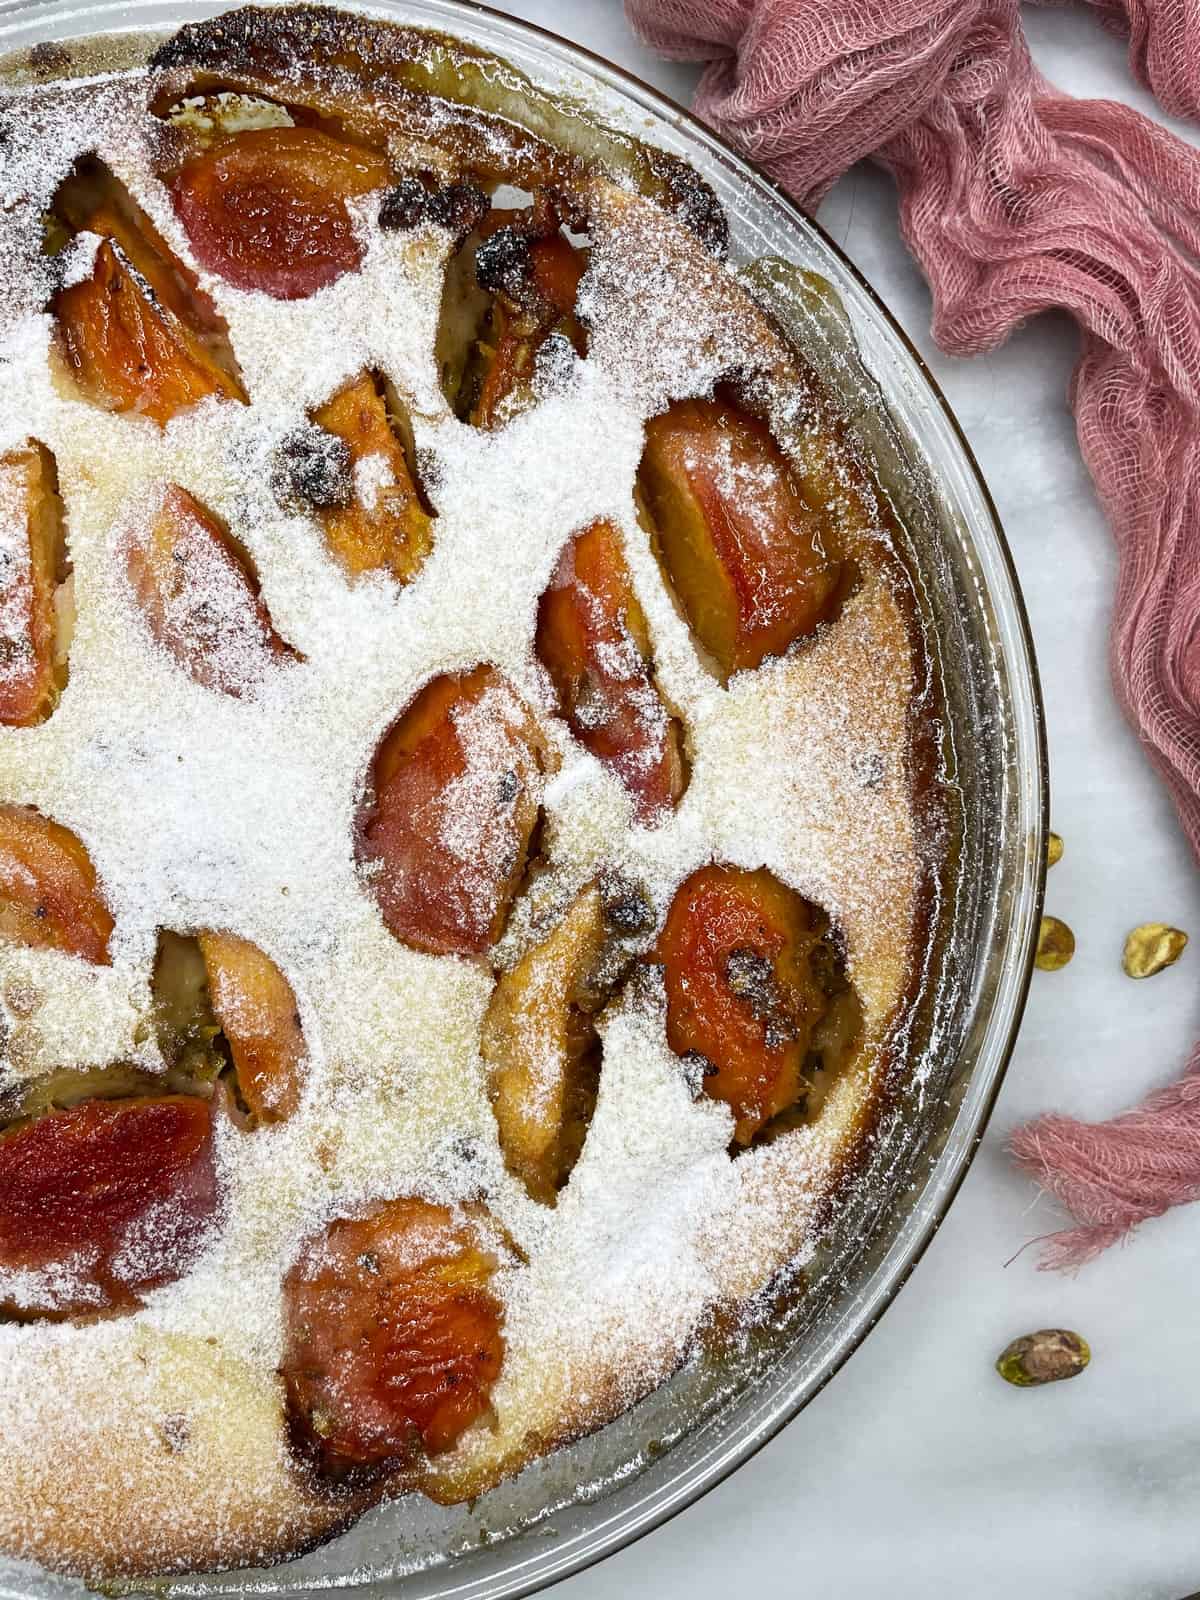 Baked peach clafoutis in a baking dish